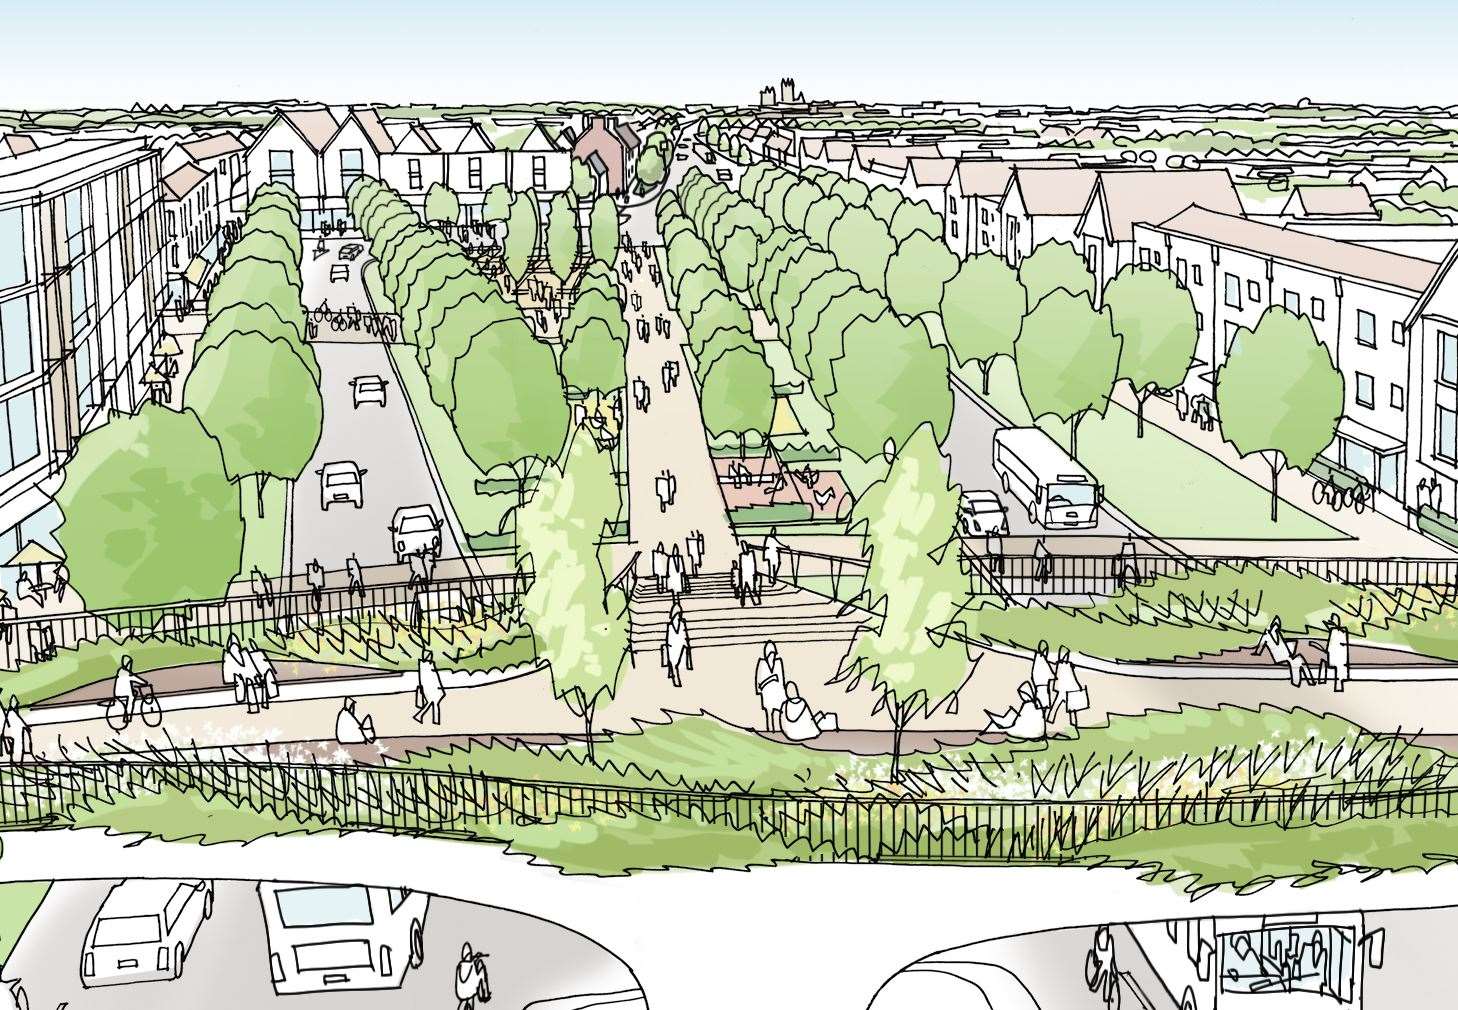 An artist's impression of the proposed 4,000-home Mountfield Park scheme